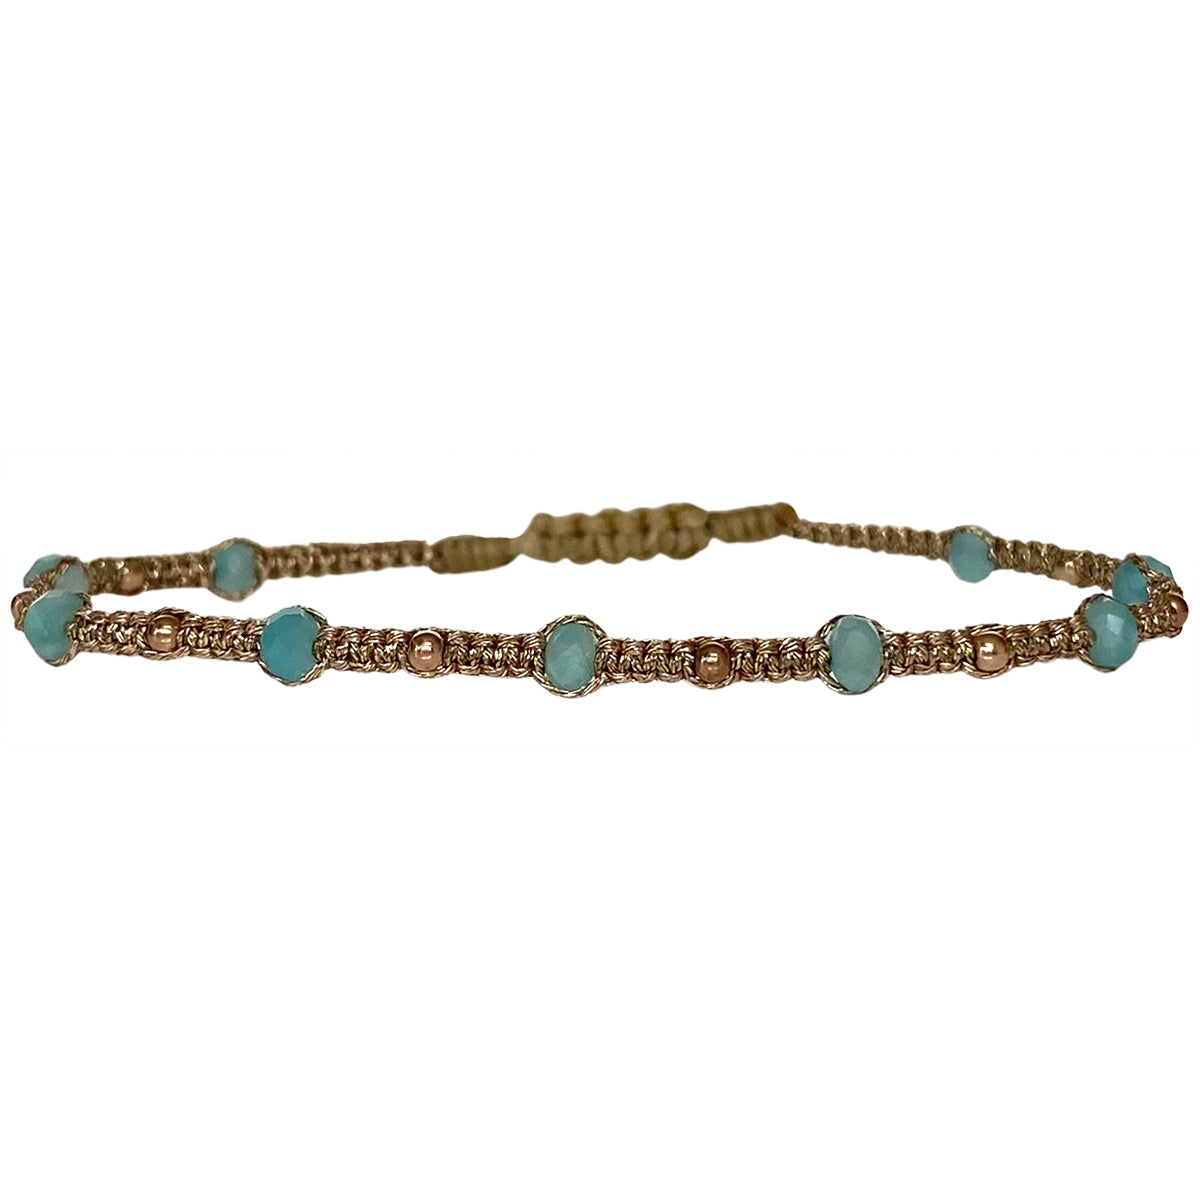 This delicate design is handwoven by our team of artisans in Colombia using metallic threads, amazonite semi-precious stones and 14k rose gold filled beads.  Wear it solo or with your favourite accessories!  Details:  -Handmade bracelet  -Women bracelet  -Metallic threads   -Amazonite semi-precious stones  -14k rose gold filled beads  -Adjustable bracelet   -Width: 3mm  -Can be worn in the water